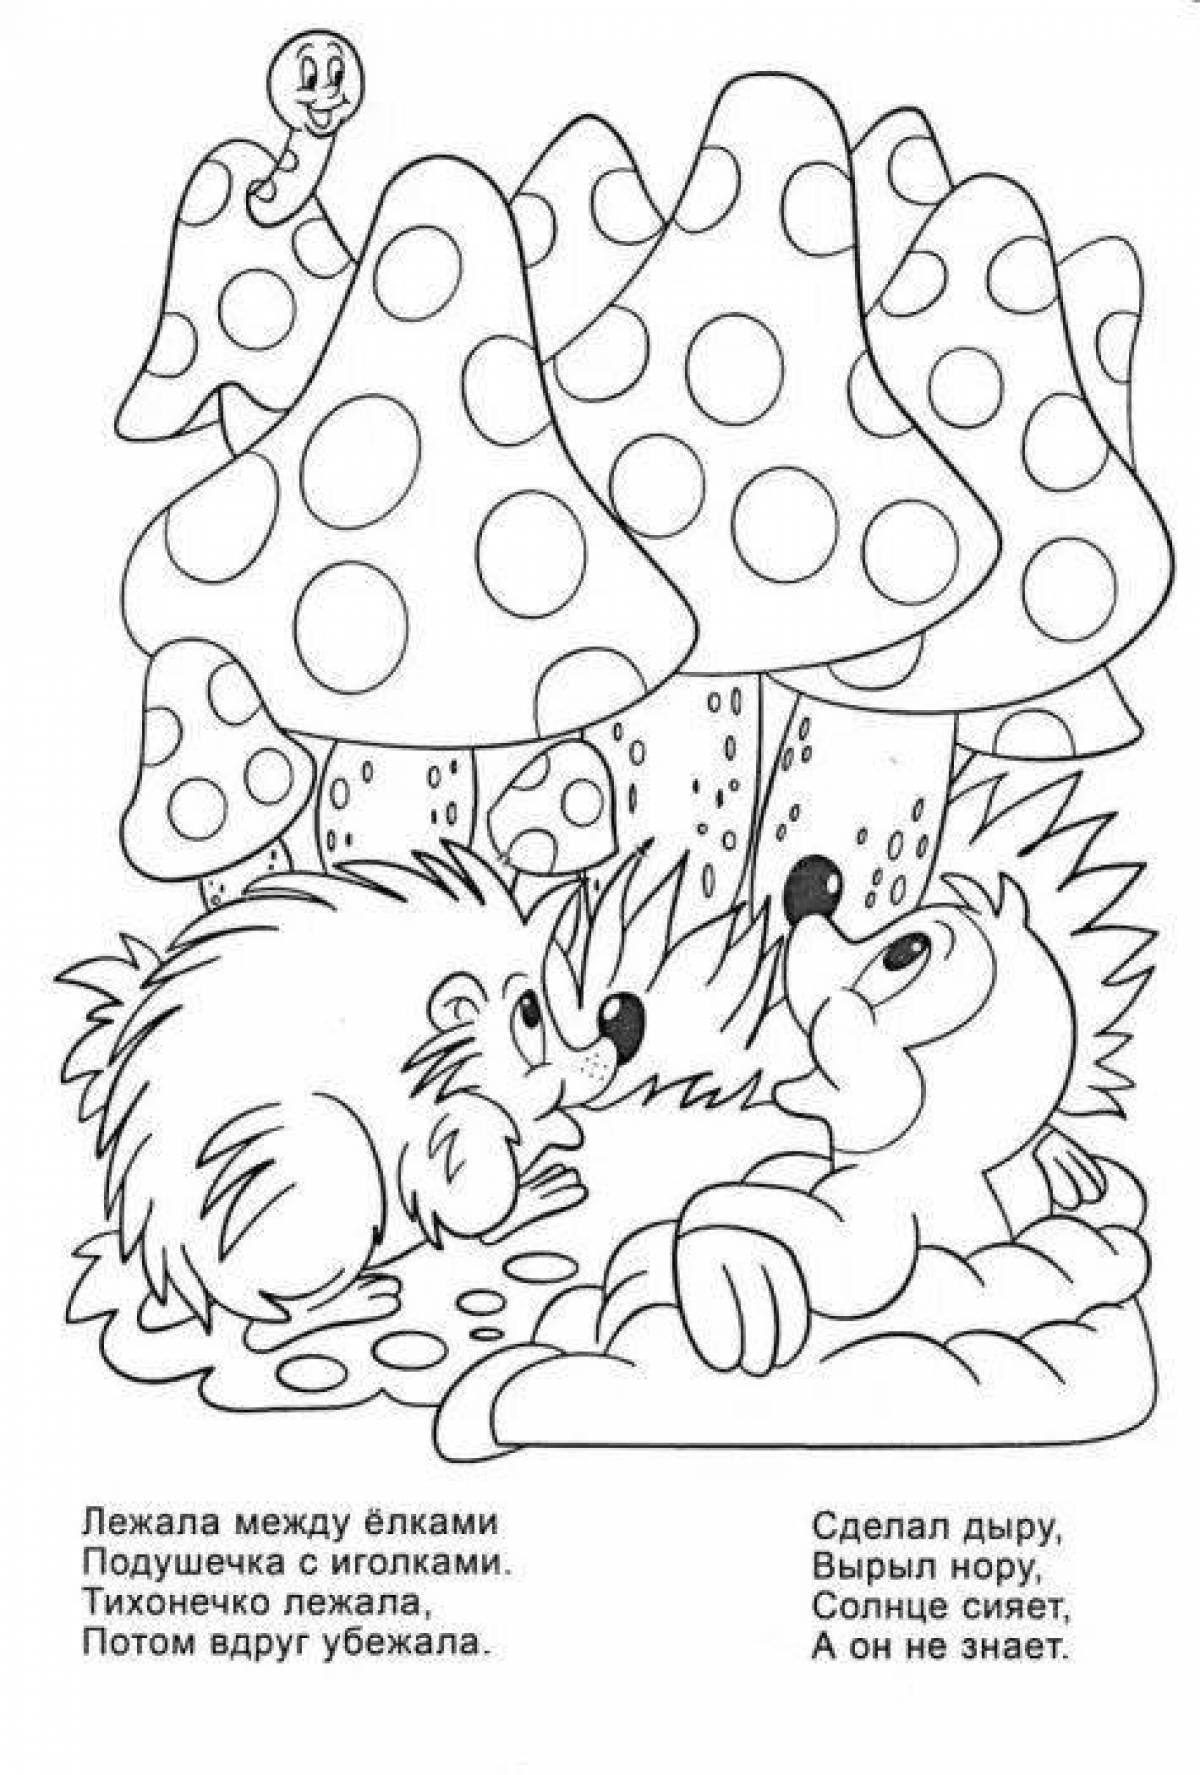 Wonderful puzzle coloring book